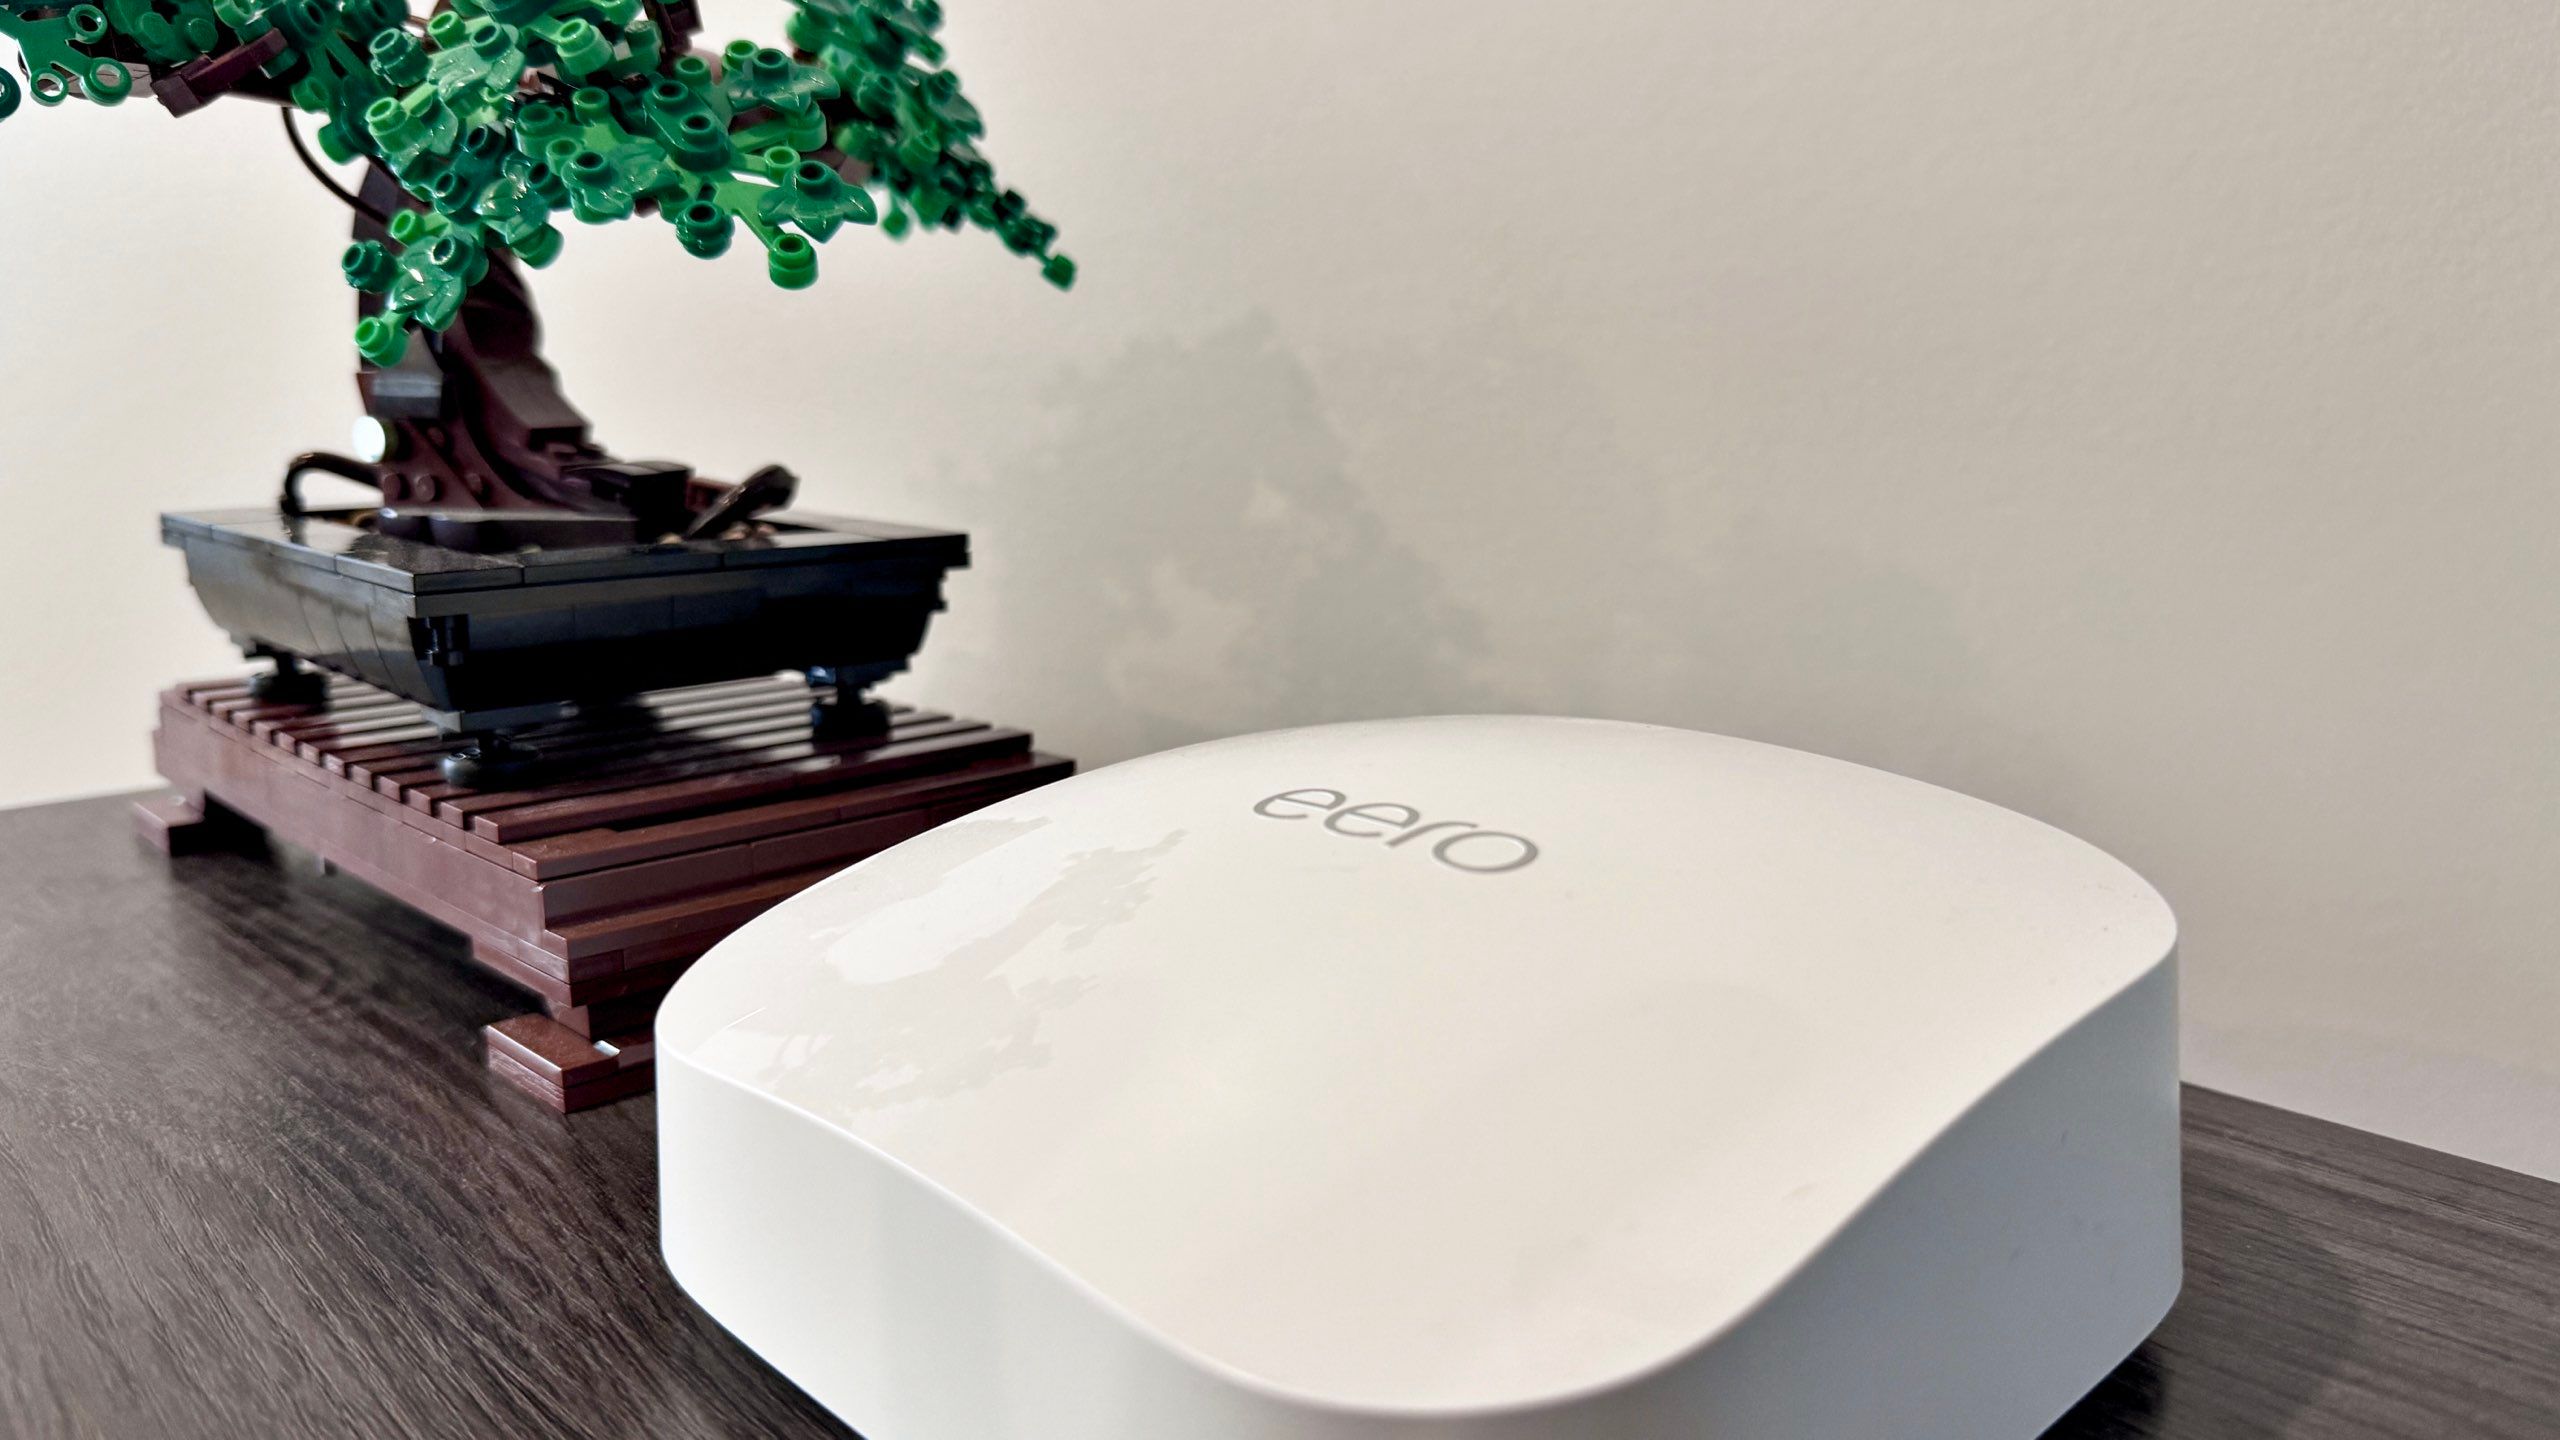 5 ways to optimize your mesh Wi-Fi network